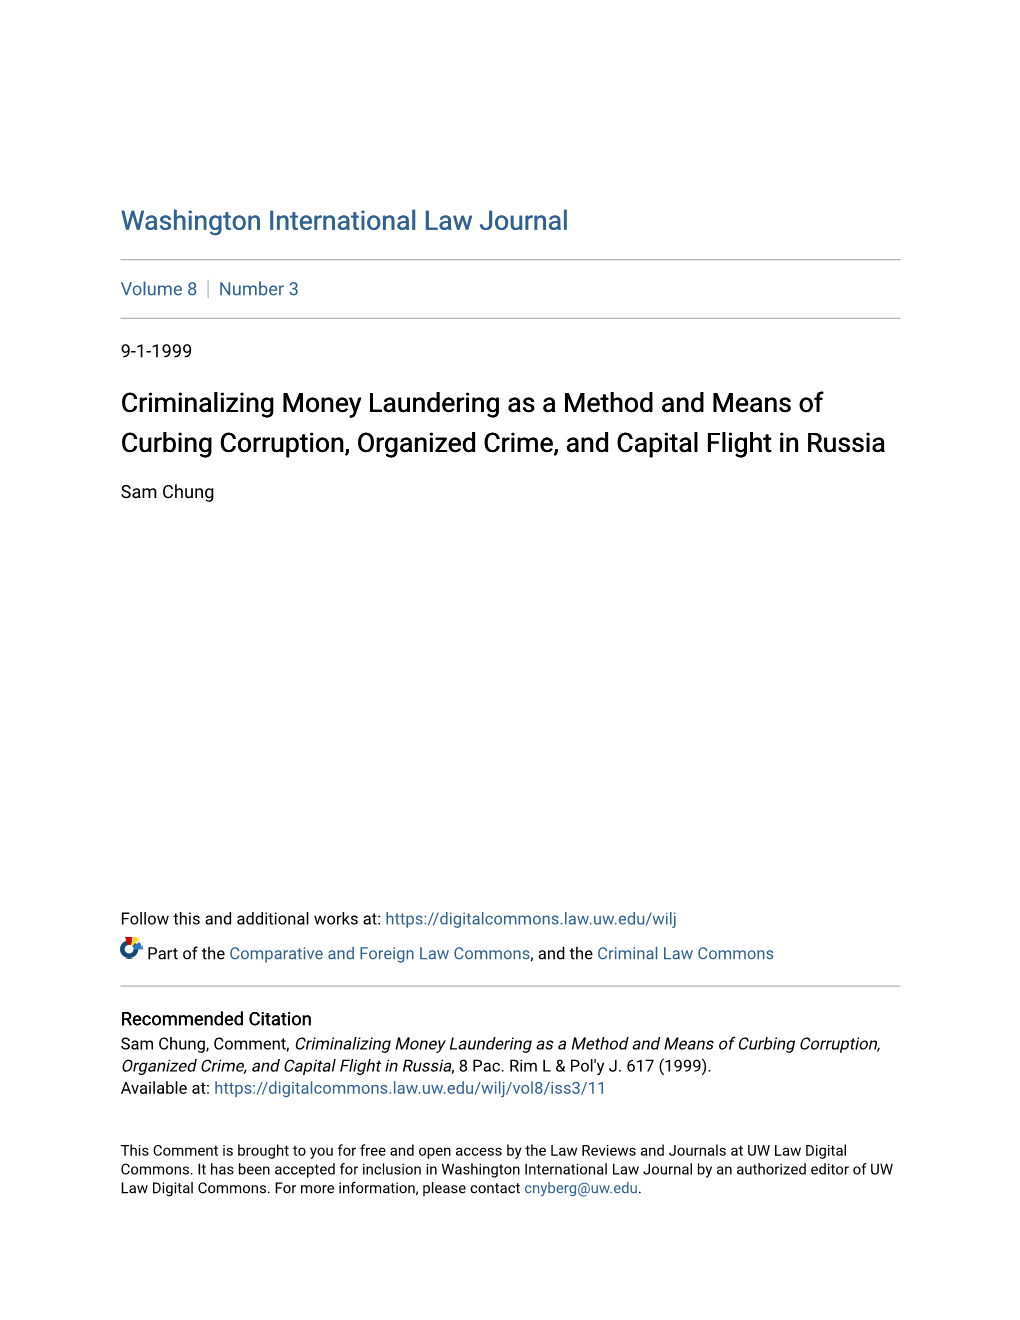 Criminalizing Money Laundering As a Method and Means of Curbing Corruption, Organized Crime, and Capital Flight in Russia